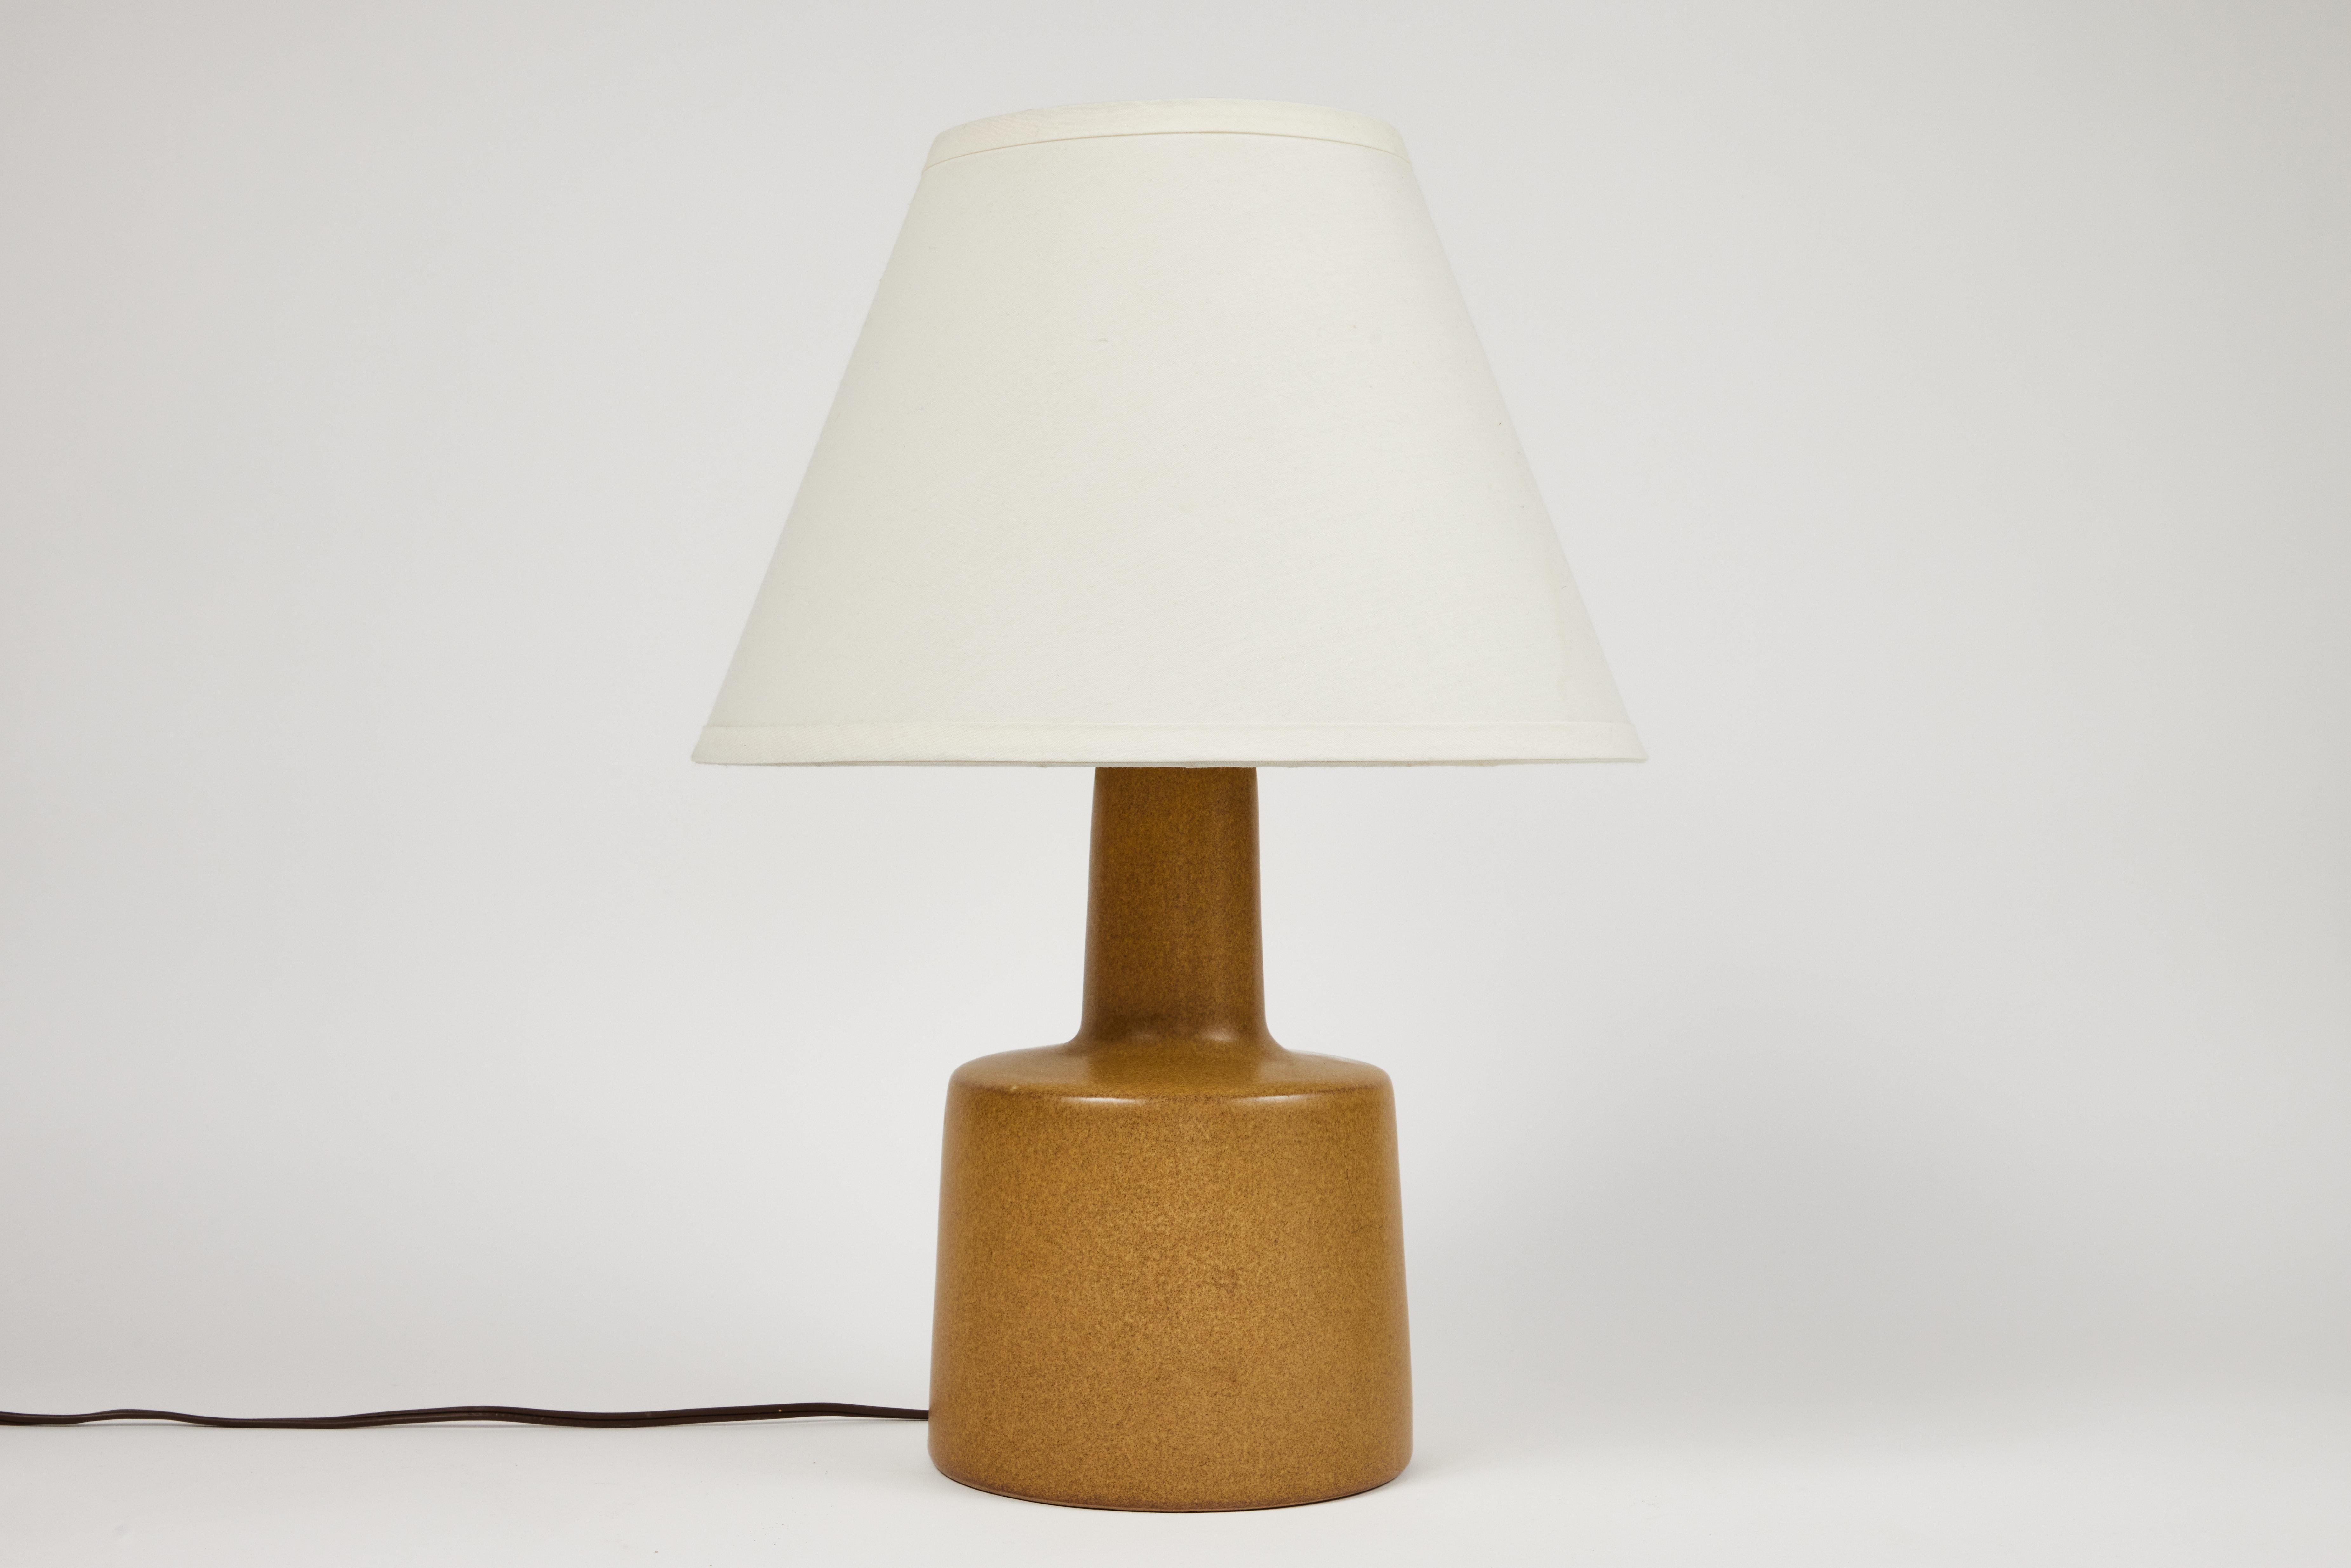 1950s Jane & Gordon Martz table lamp for Marshal Studios. Executed in ceramic with newer shades. Produced by Marshall Studios, Indianapolis, circa 1950s. An iconic example of midcentury Americana at its most refined. Signature in ceramic and both